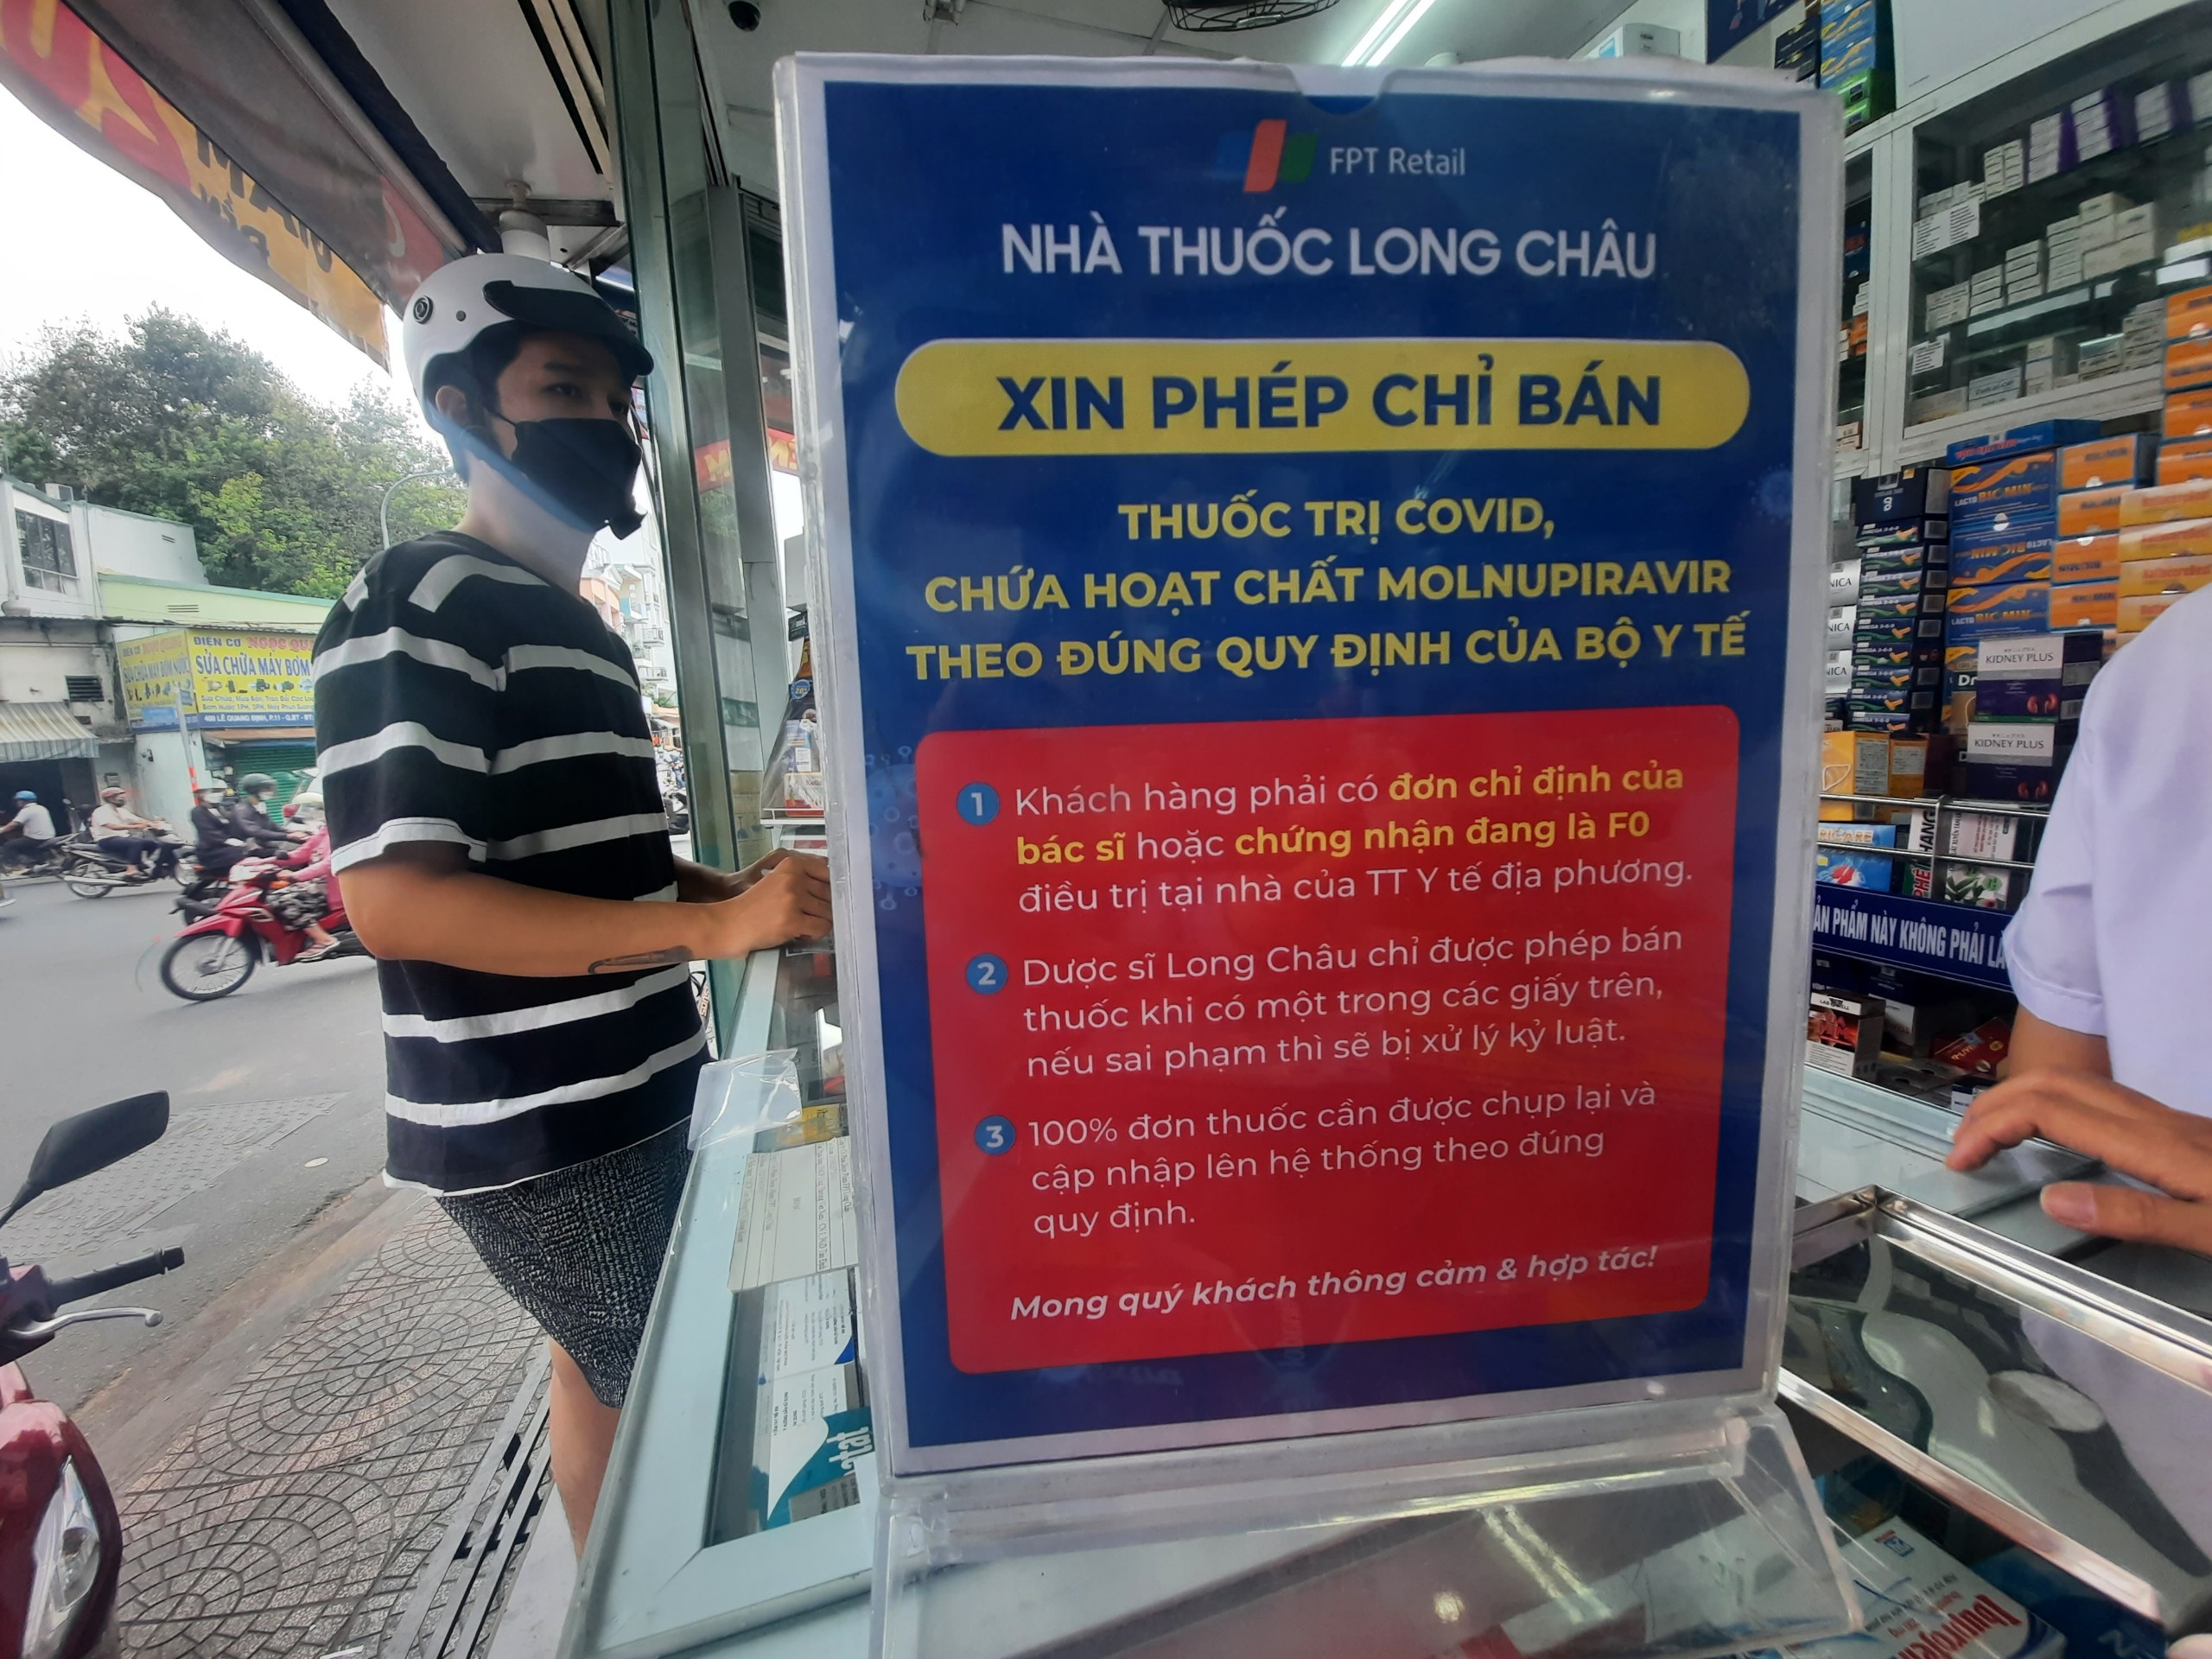 A sign showing the requirements that people must meet to buy antiviral medicine at a store of Long Chau Pharmacy in Ho Chi Minh City. Photo: Thu Hien / Tuoi Tre